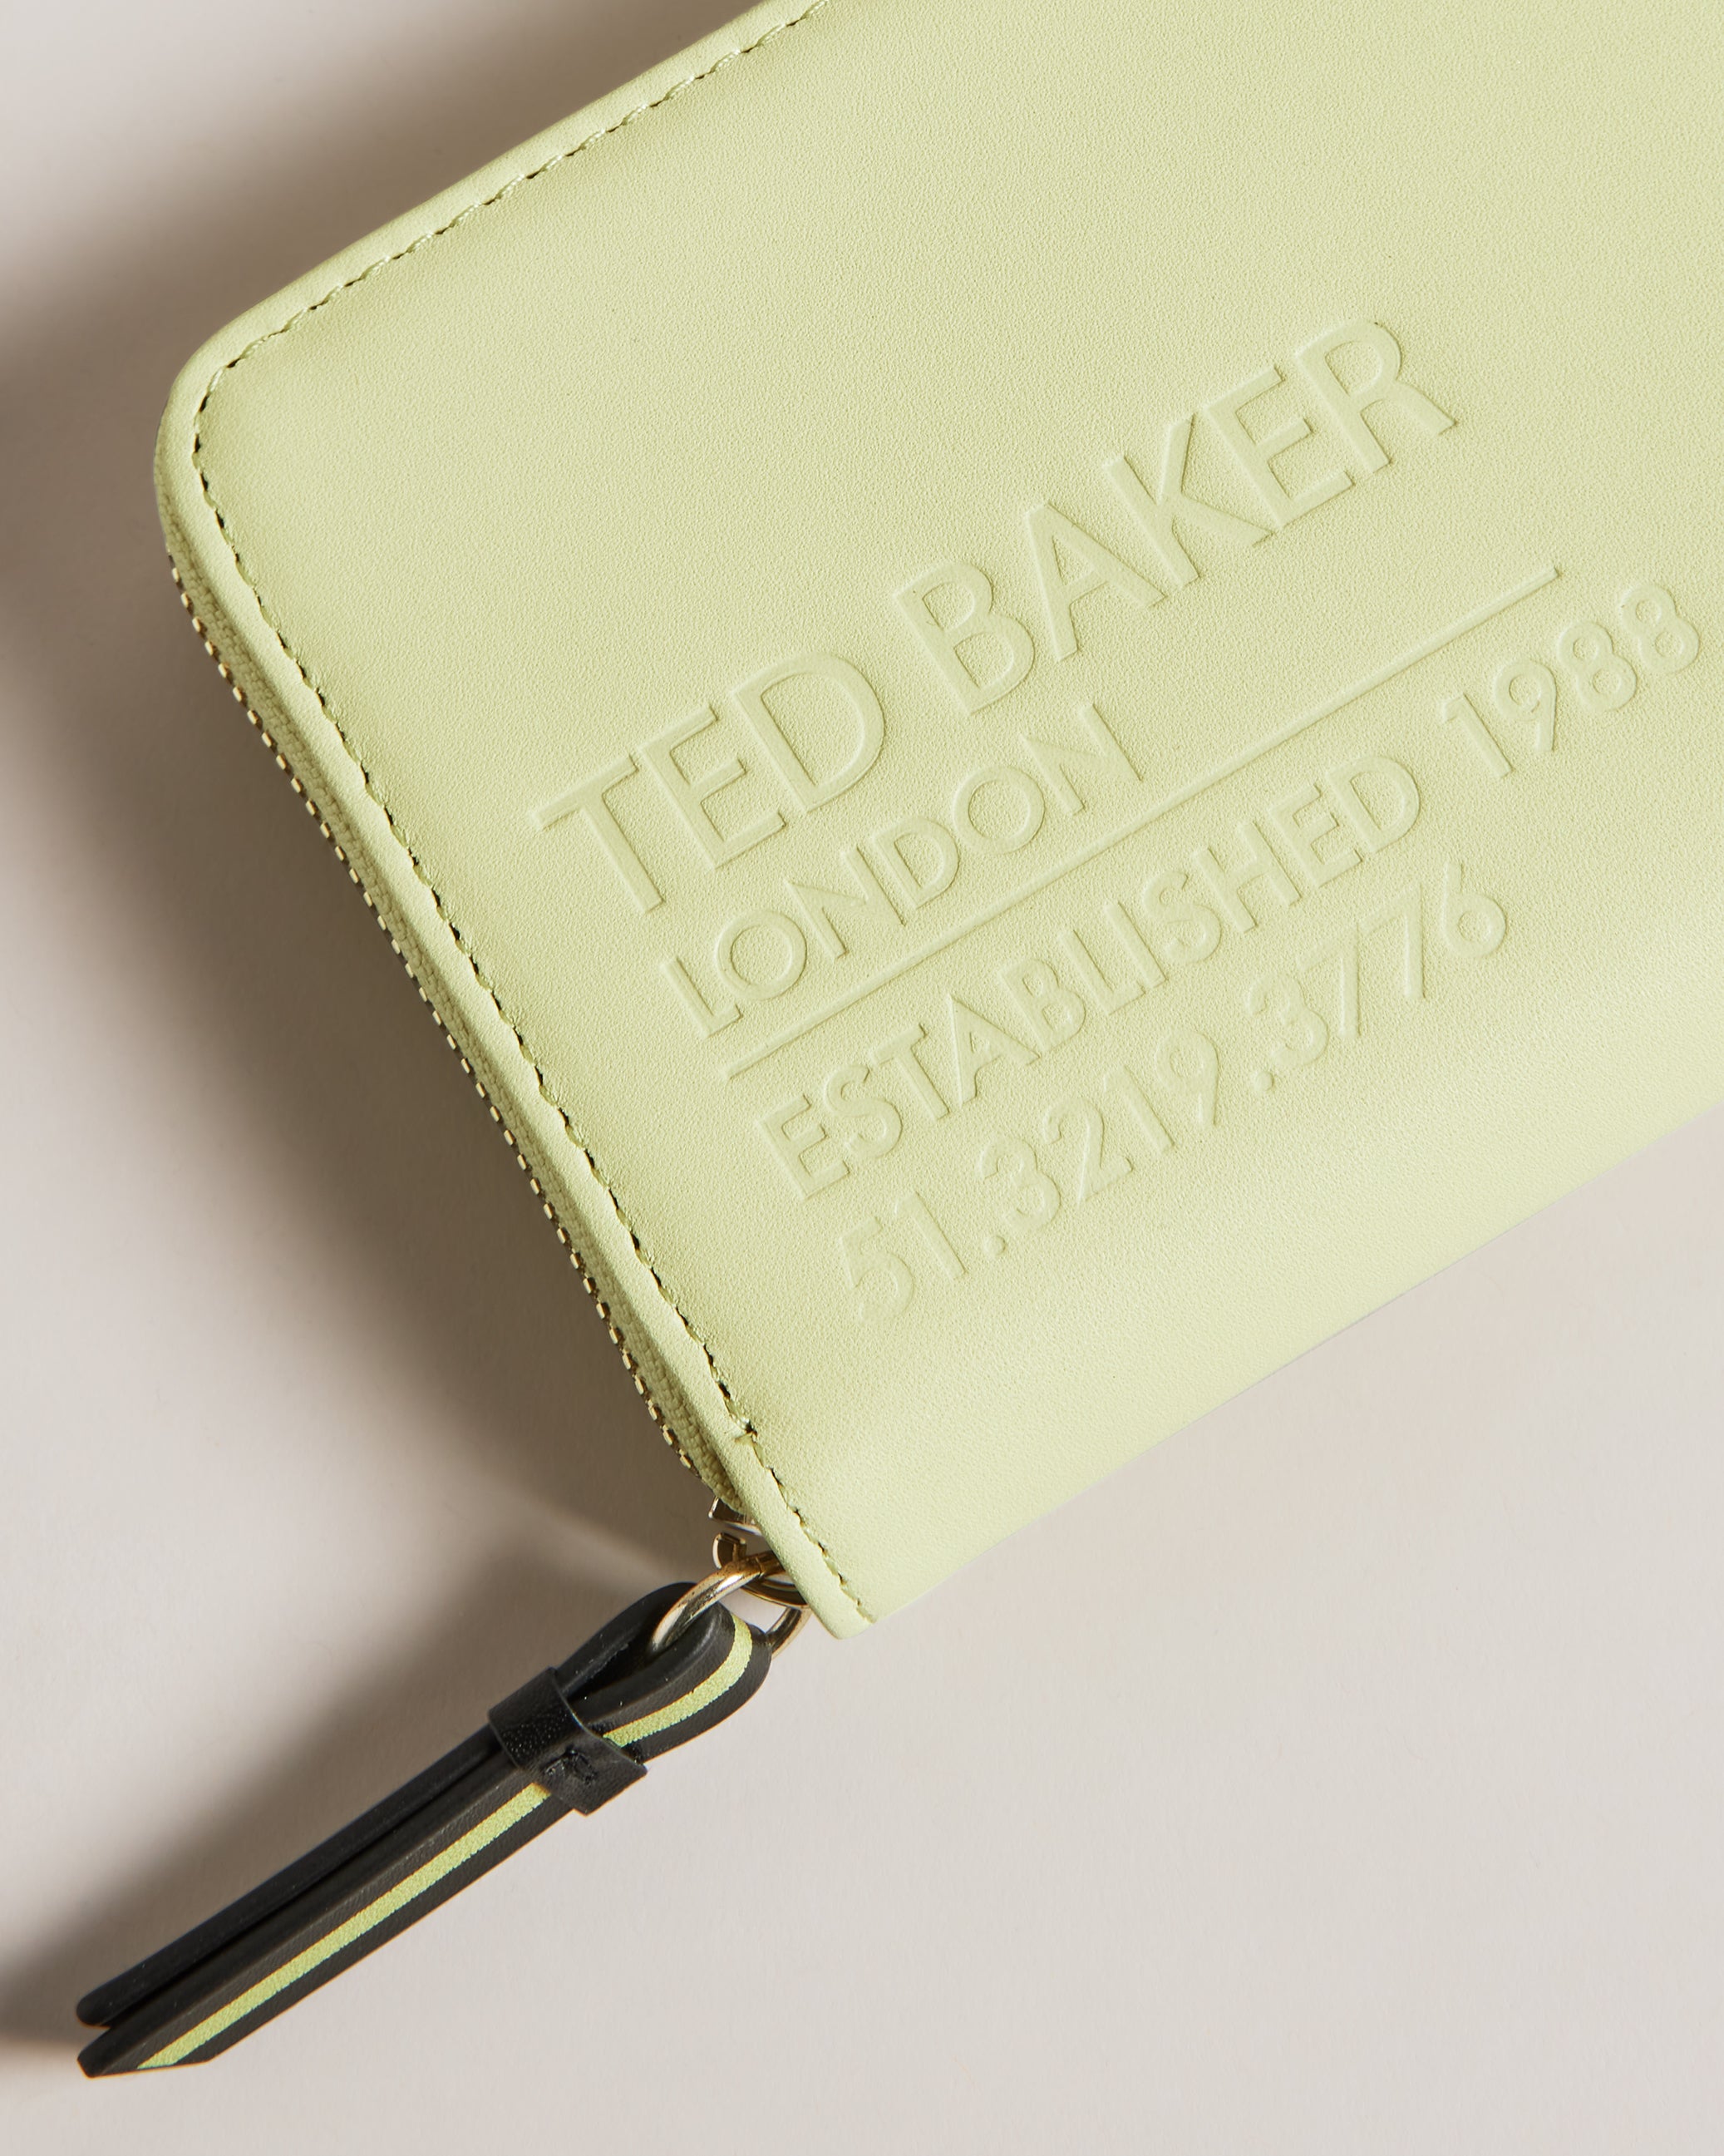 Shop Women's Ted Baker Coin Purses up to 70% Off | DealDoodle